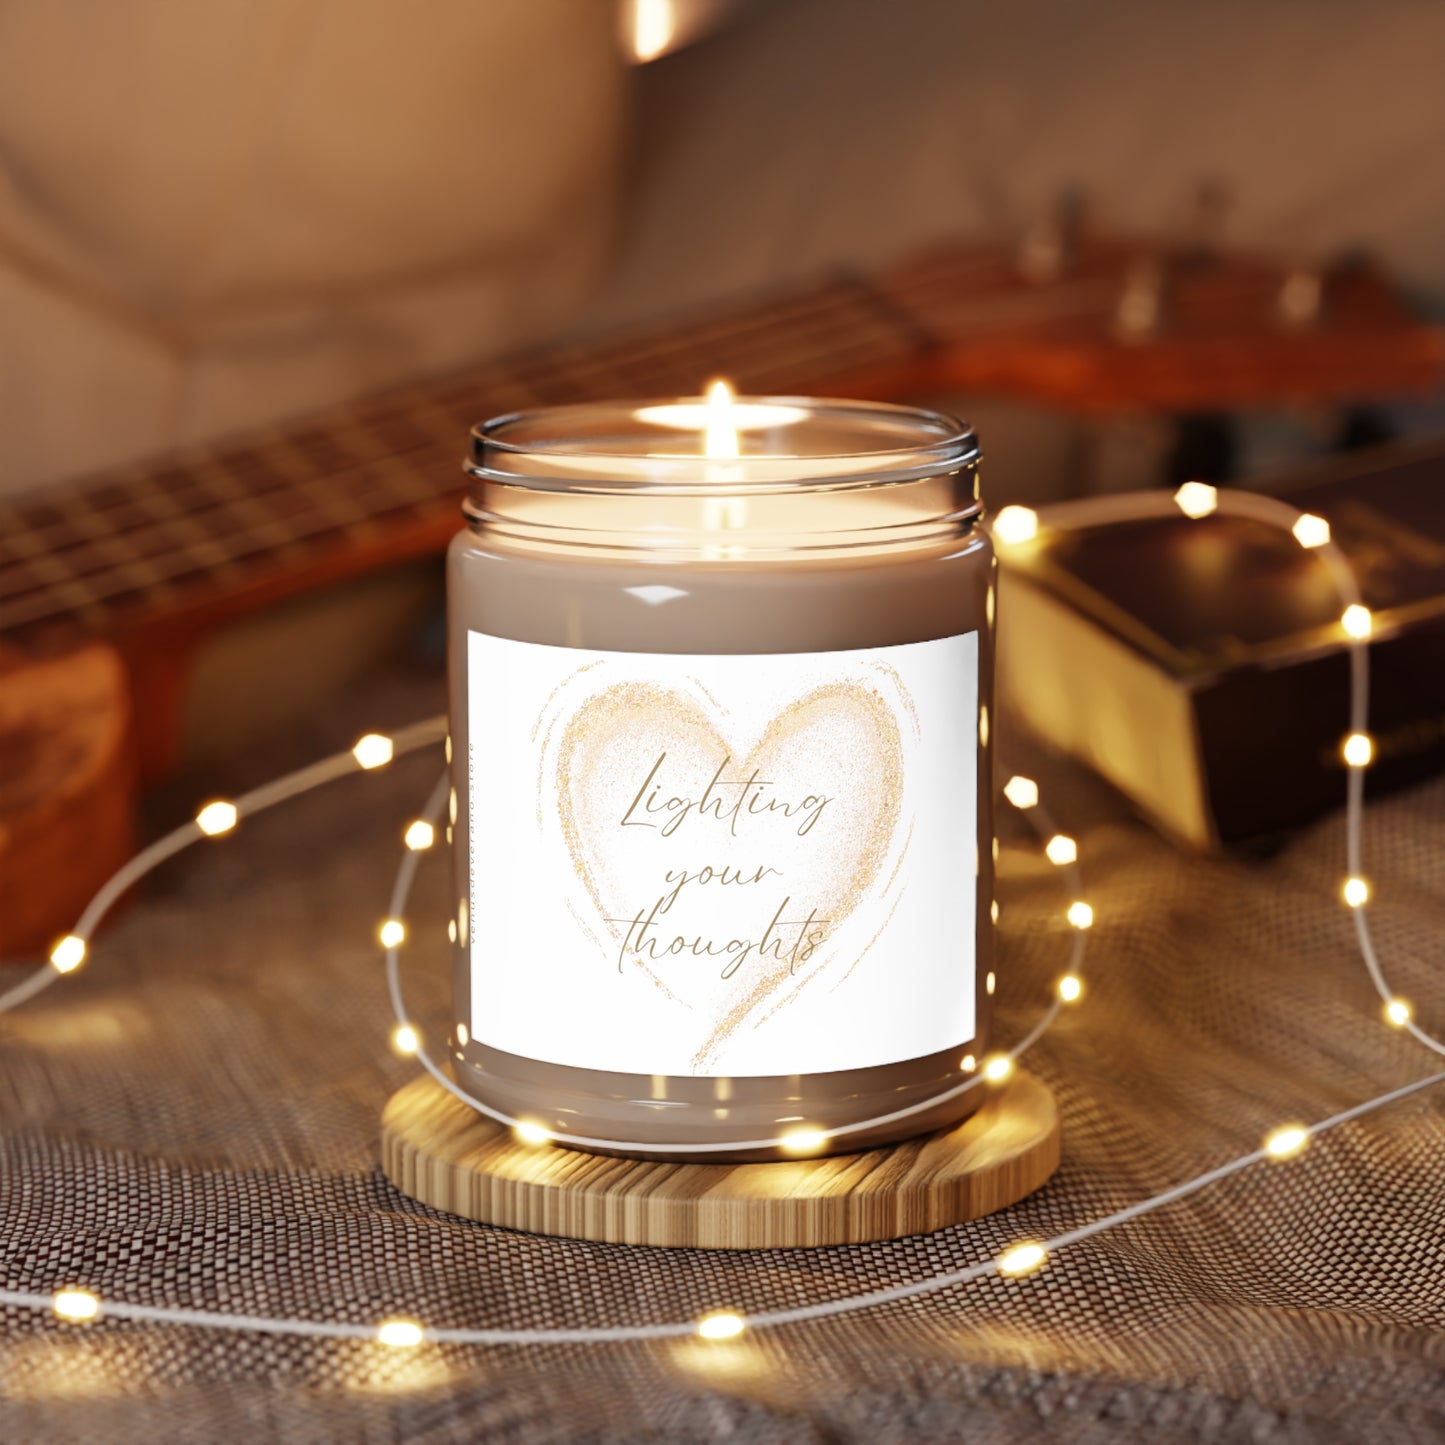 Scented Candles, 9oz - LIGHTING your thoughts- Made 100% natural soy wax blend and cotton wick - Vanilla Bean, Comfort Spice and Sea Breeze fragrances available.